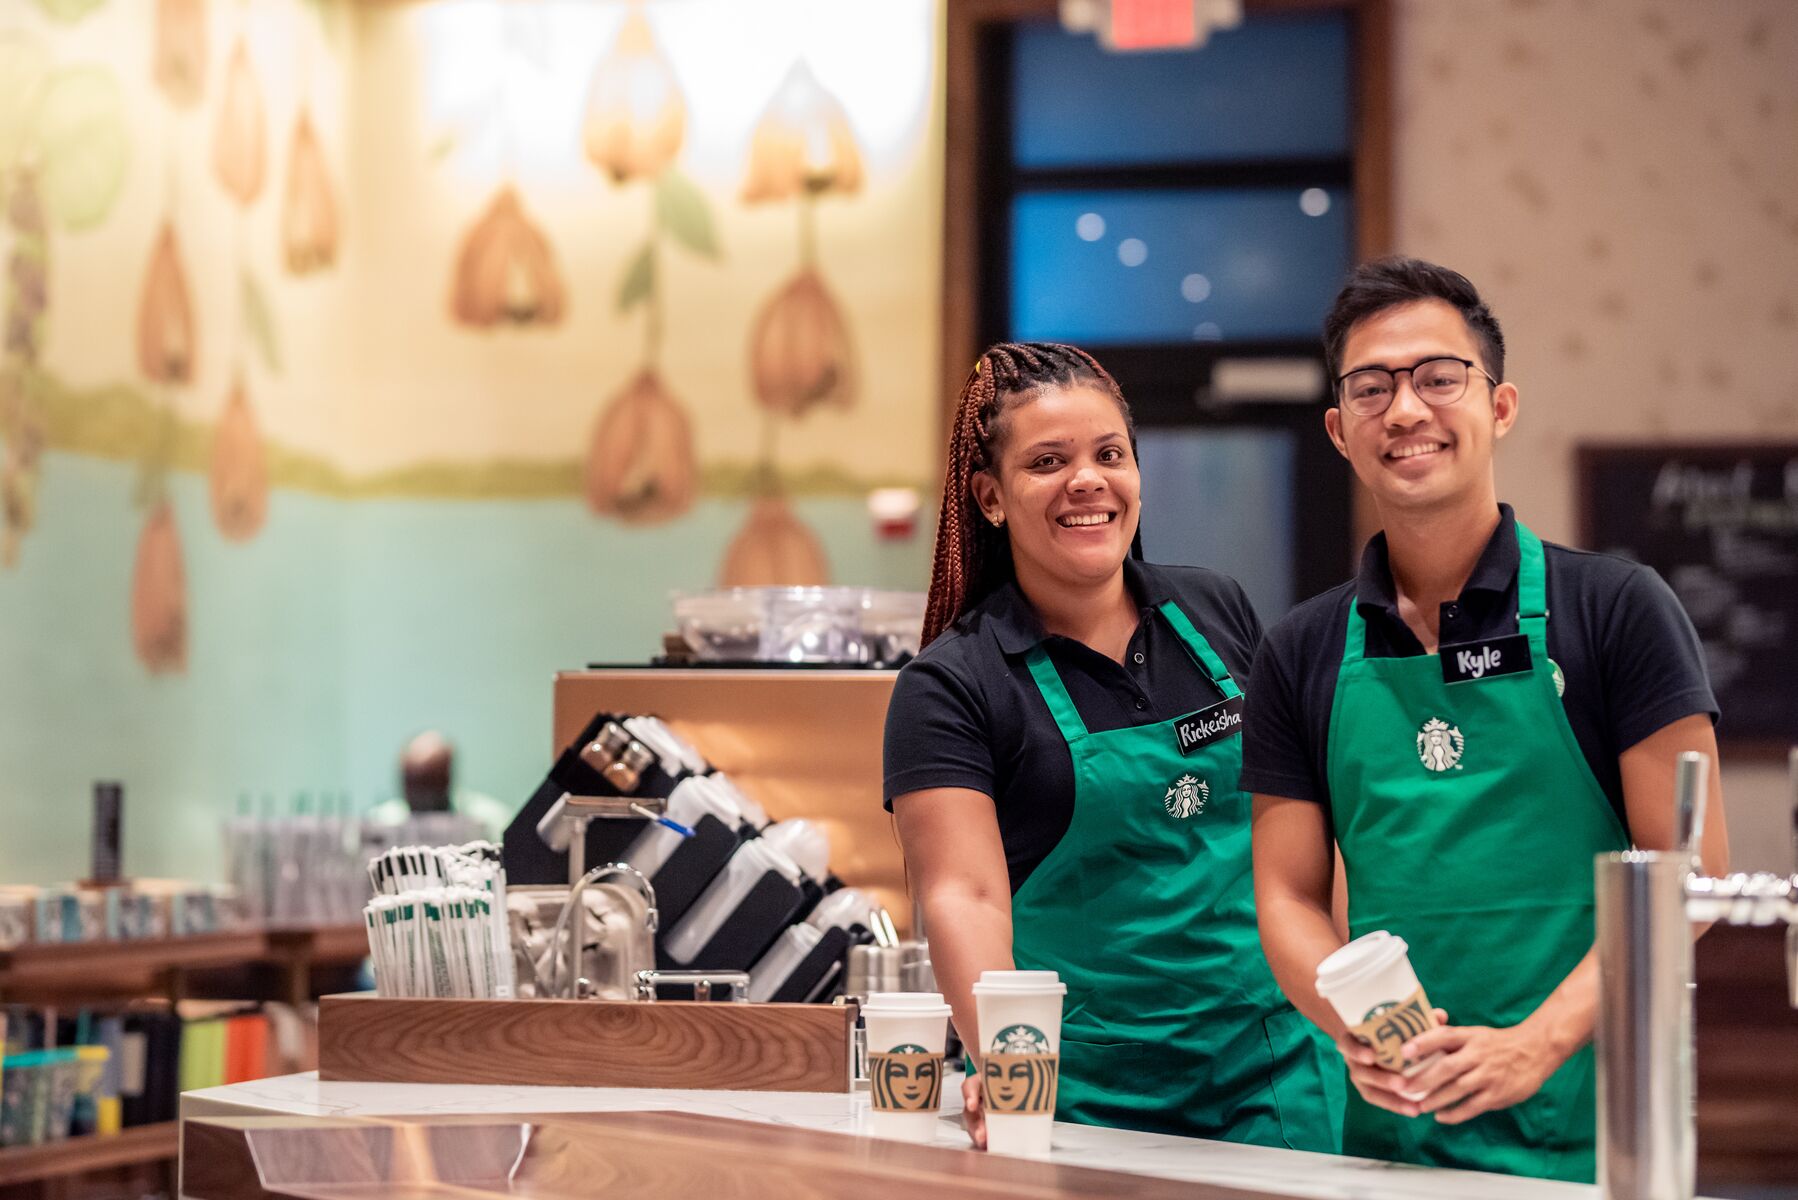 Team members Rickeisha and Kyle in the newly opened Starbucks café in Camana Bay, the first Cayman Islands location for the global coffeehouse.